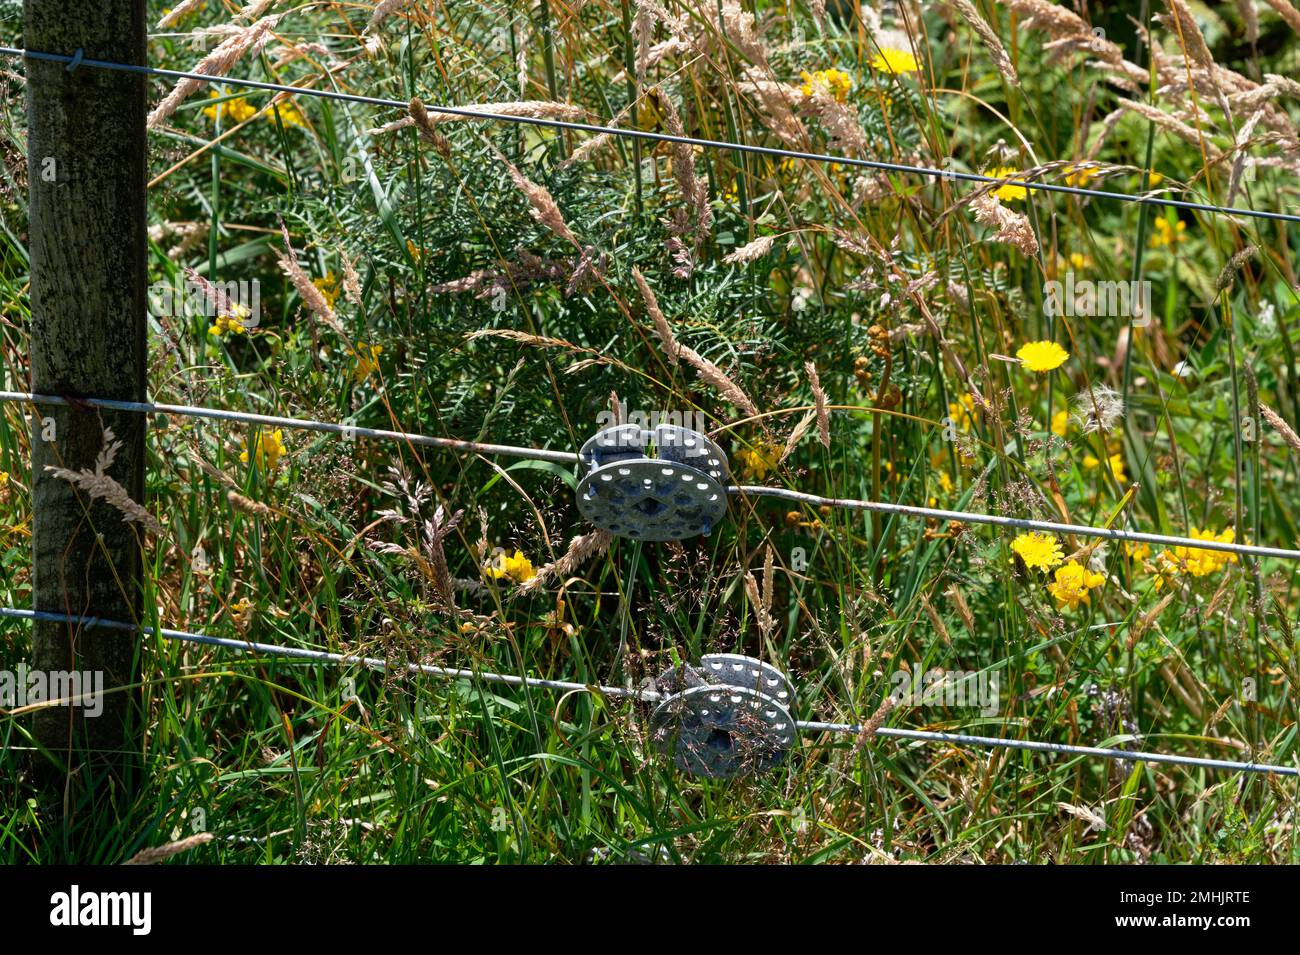 Fence strainers are used on wire fences to keep the wire taught. The wire is stapled to the post Stock Photo